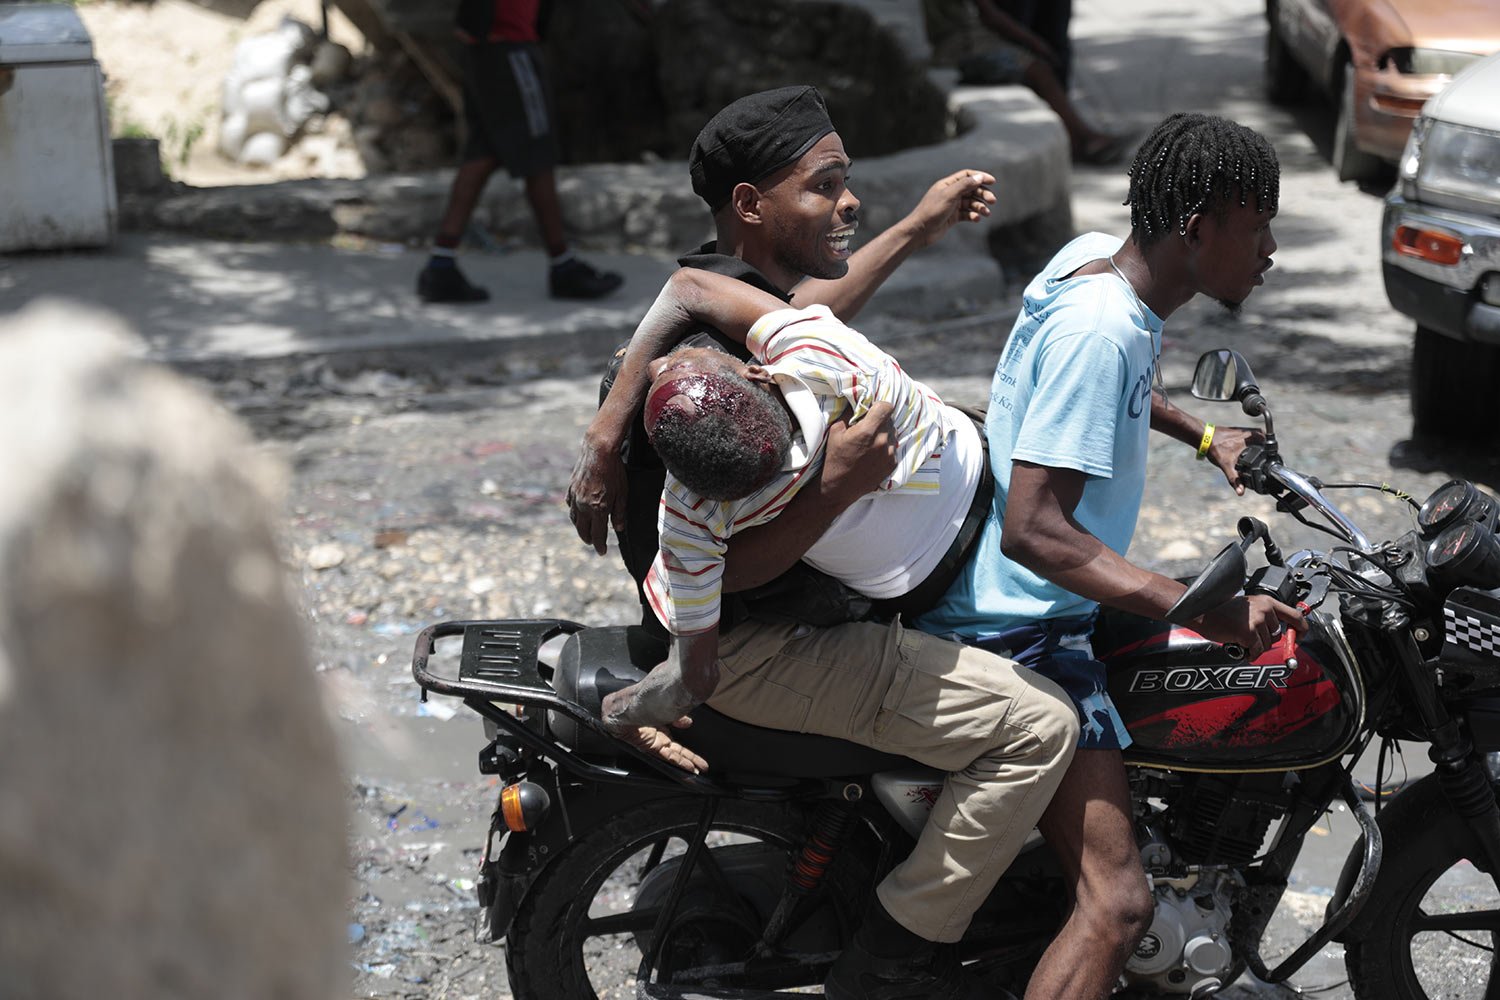  A police officer holds a person who was shot in the head during violent gang clashes, on a moto-taxi in the Carrefour-Feuilles district of Port-au-Prince, Haiti, Aug. 15, 2023. (AP Photo/ Odelyn Joseph) 